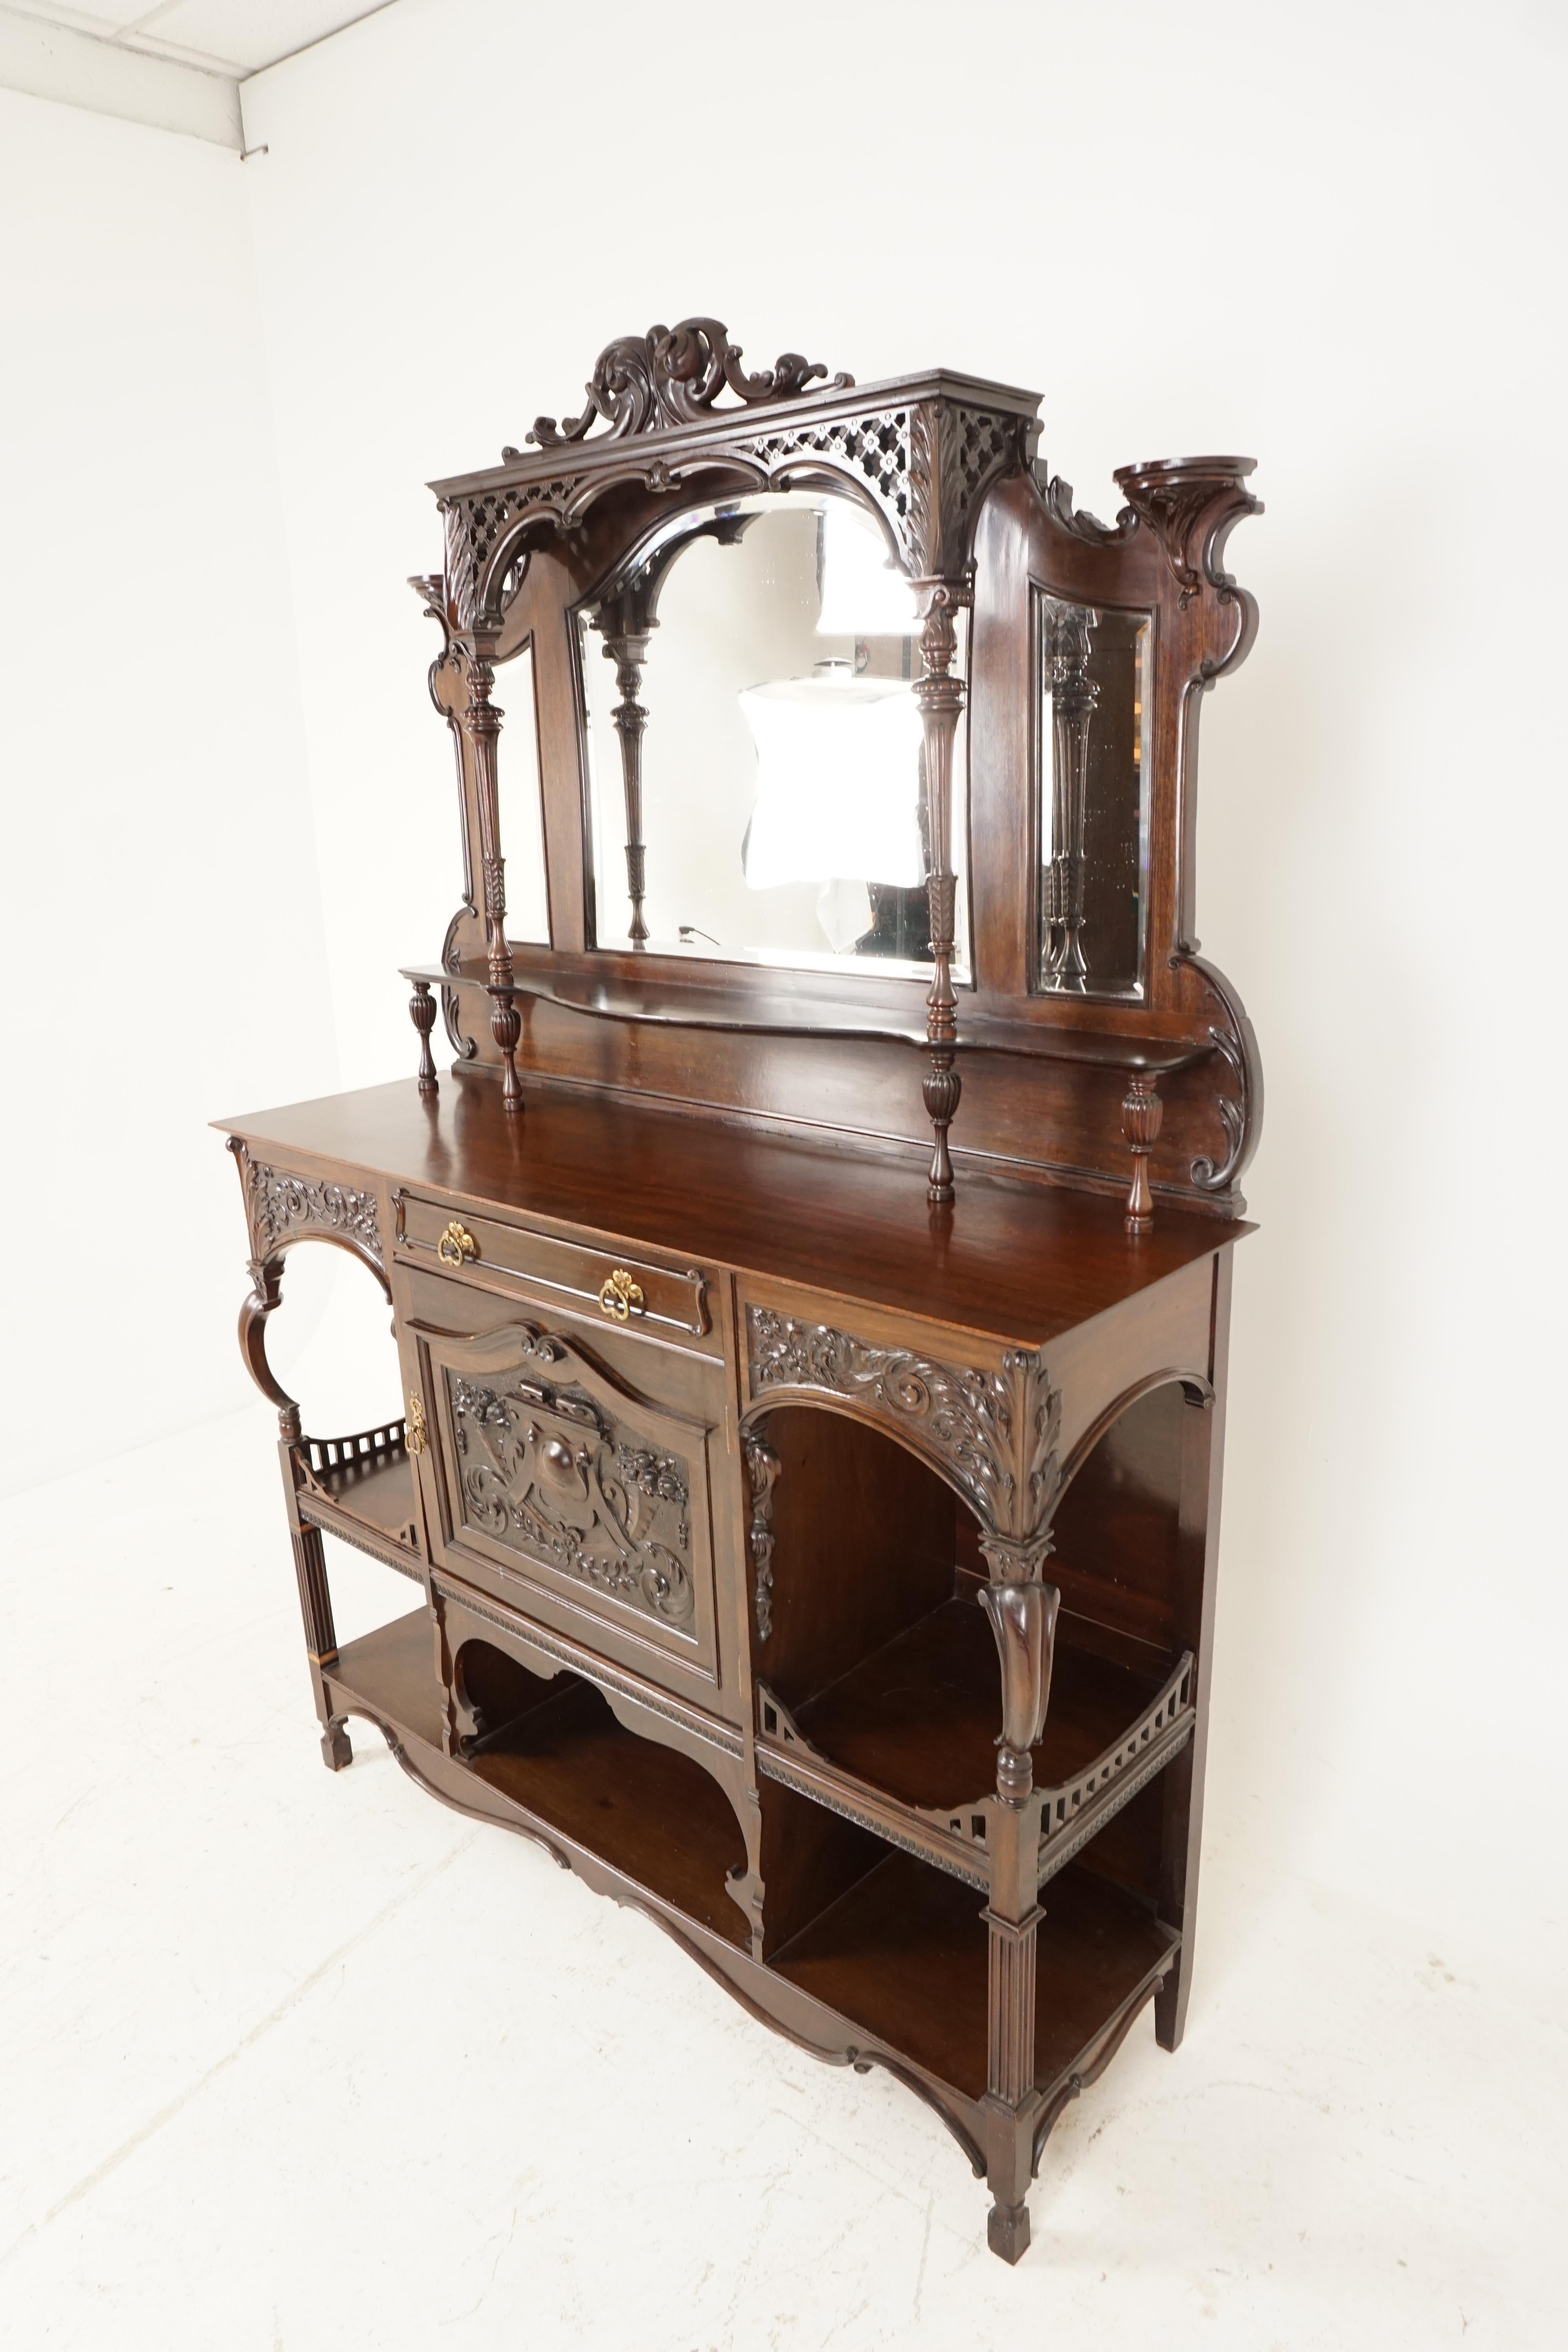 Antique Victorian Walnut parlour, side display cabinet, Scotland, 1880, B2261

Scotland, 1880
Solid Walnut 
Original finish
Carved pediment on top
Pair of half circular candleholders on sides of top
Large shaped beveled mirror in the centre
Flanked